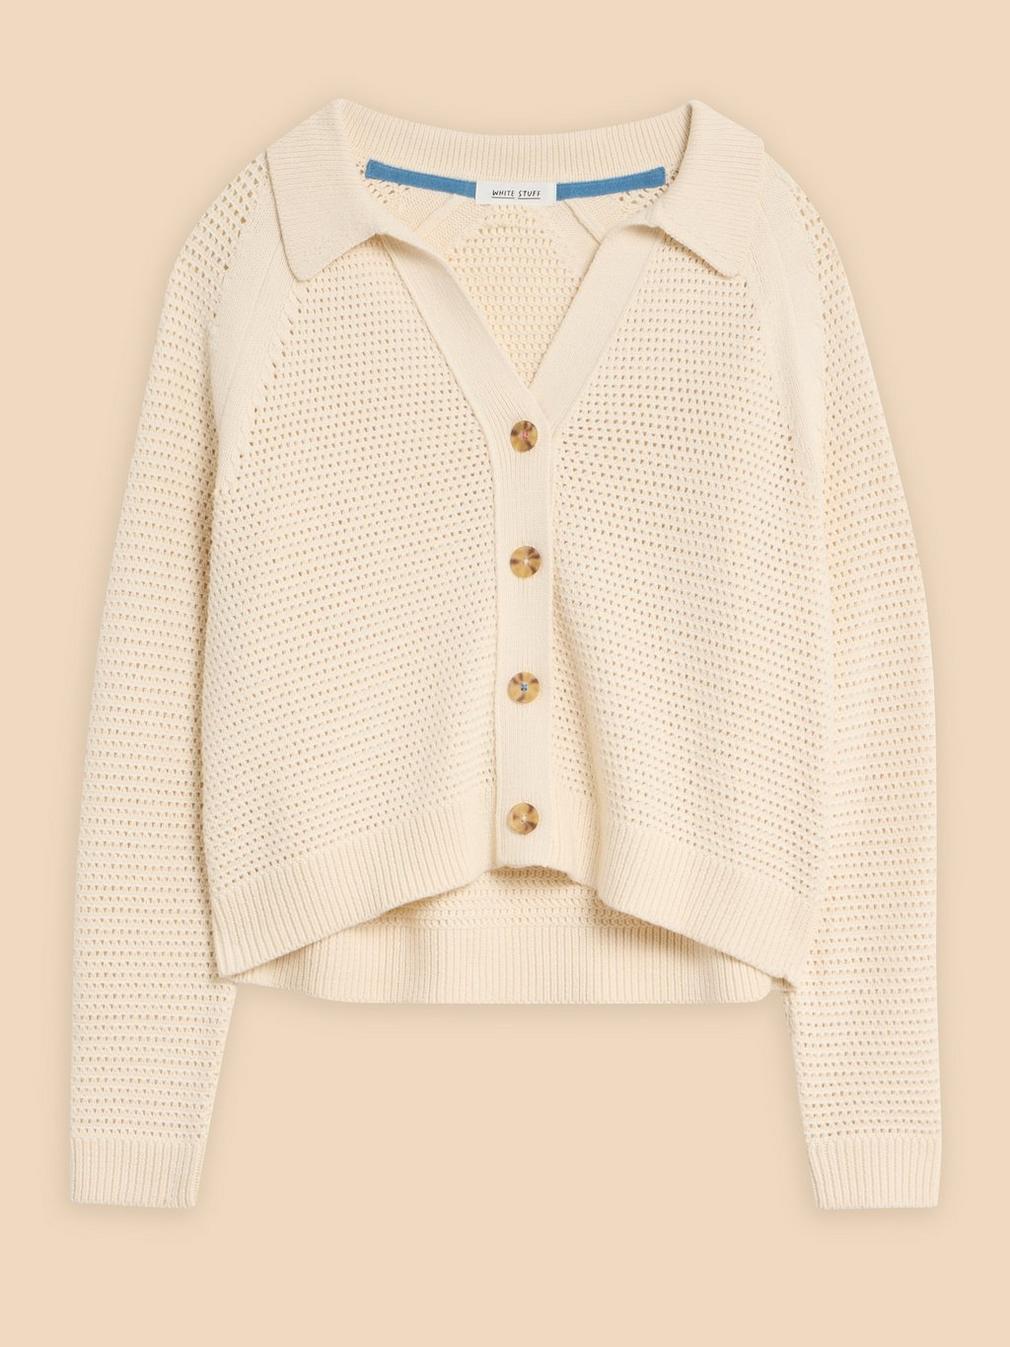 CHATERLY CROCHET COLLAR CARDI in NAT WHITE - FLAT FRONT